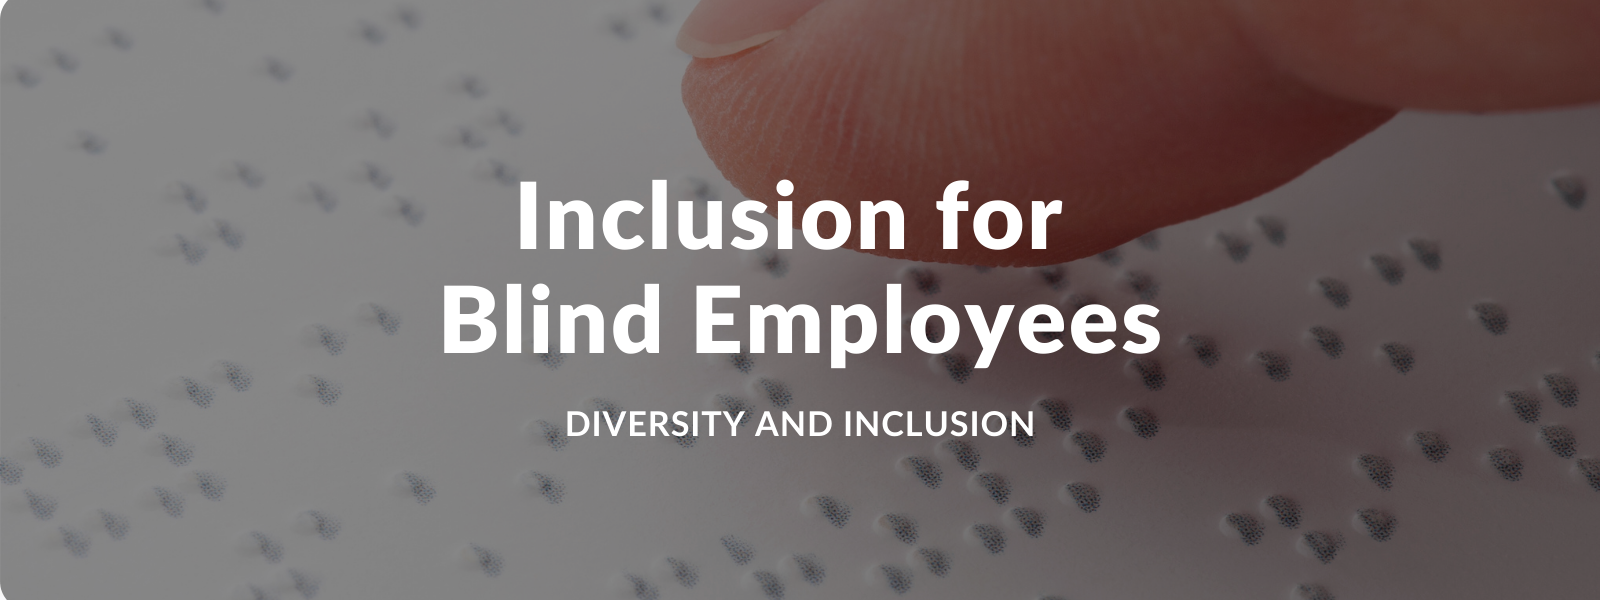 Inclusion for Blind Employees | Diversity and Inclusion